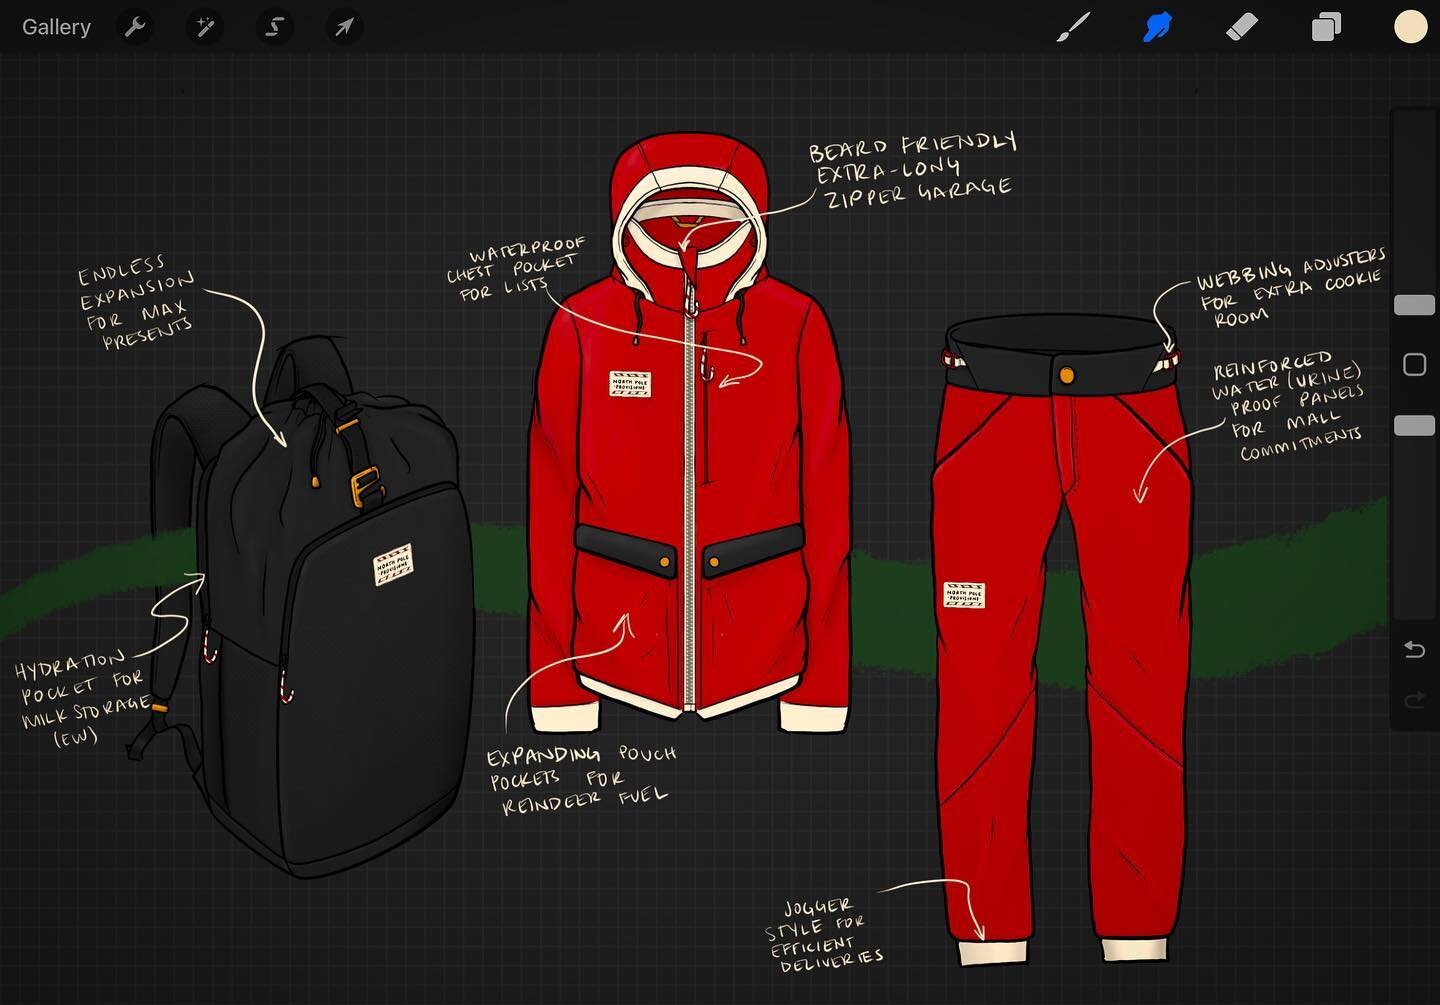 Introducing the Rein-Gear Collection 

(thanks to @grantaberry for pun assistance)

#industrialdesign #idsketching #sketchaday #productdesign #sketch #sketchbook #procreate #design #process #sketching #sketchellaneous #womeninID #fashiondesign #appar